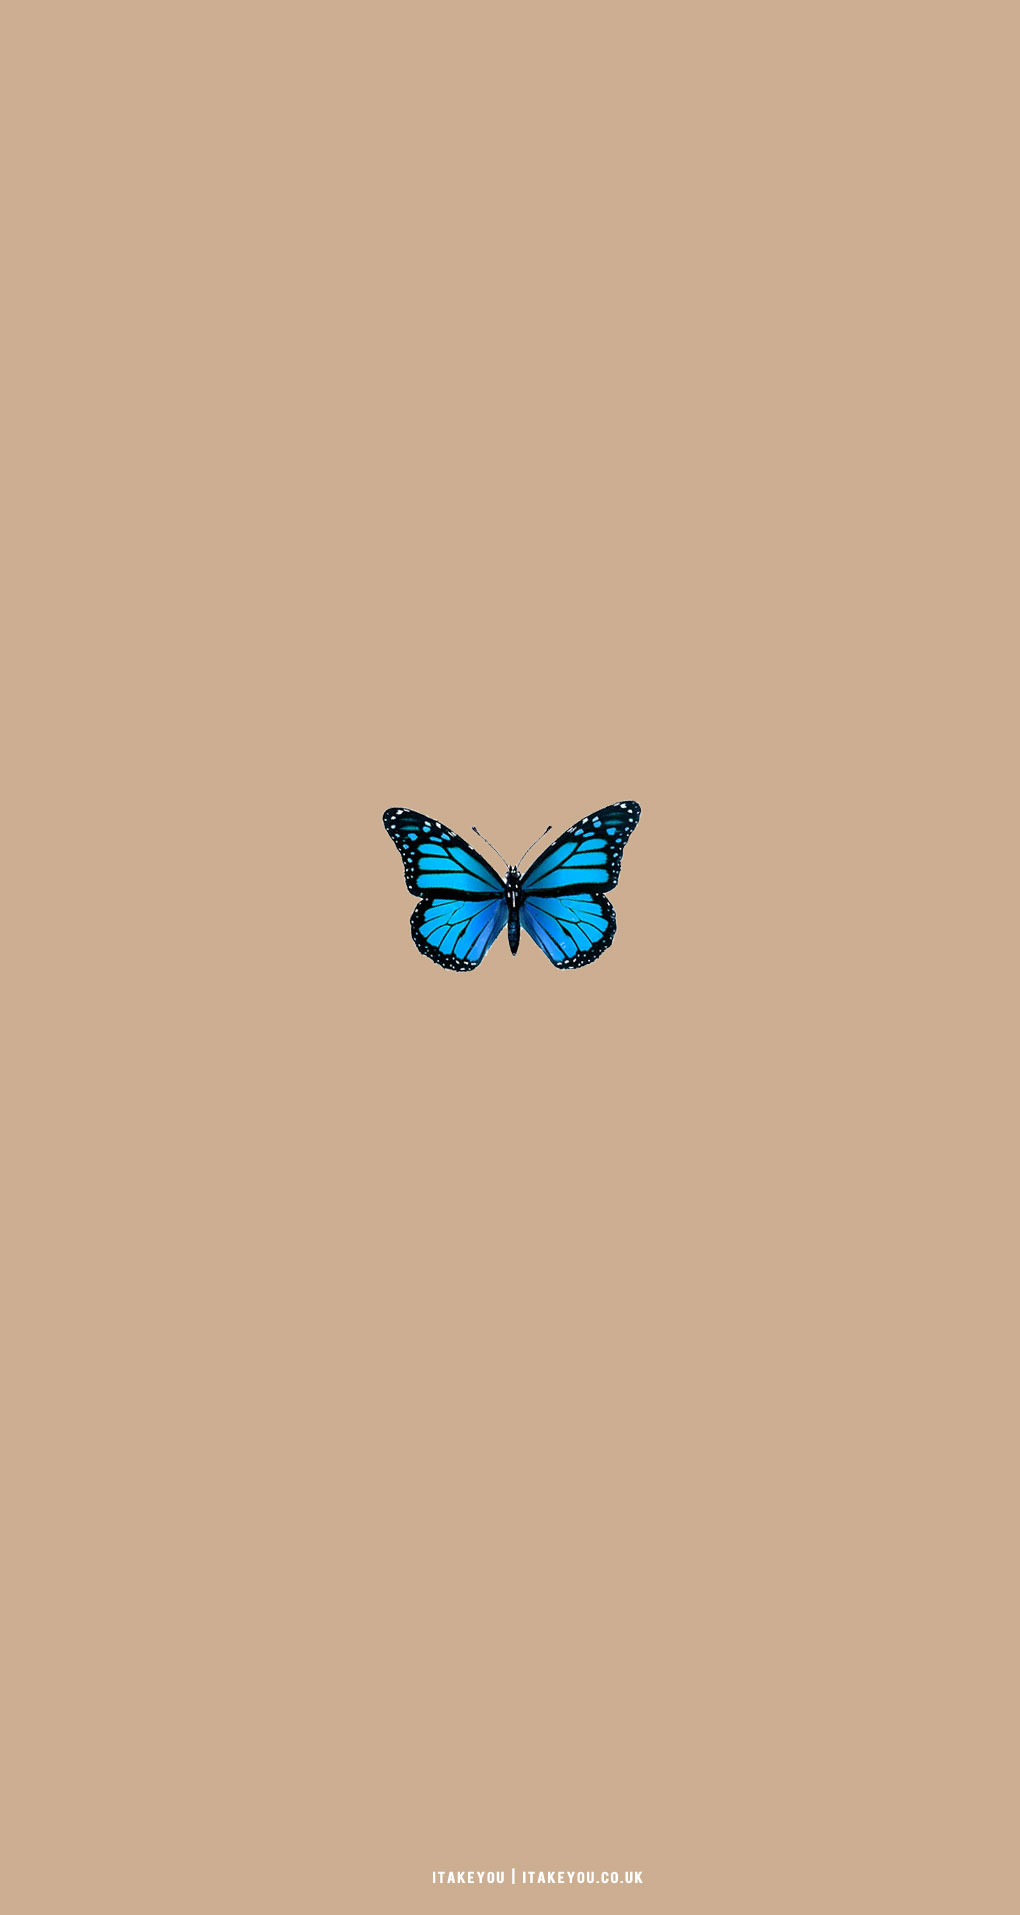 30 Cute Brown Aesthetic Wallpapers for Phone : Blue Butterfly I Take You |  Wedding Readings | Wedding Ideas | Wedding Dresses | Wedding Theme